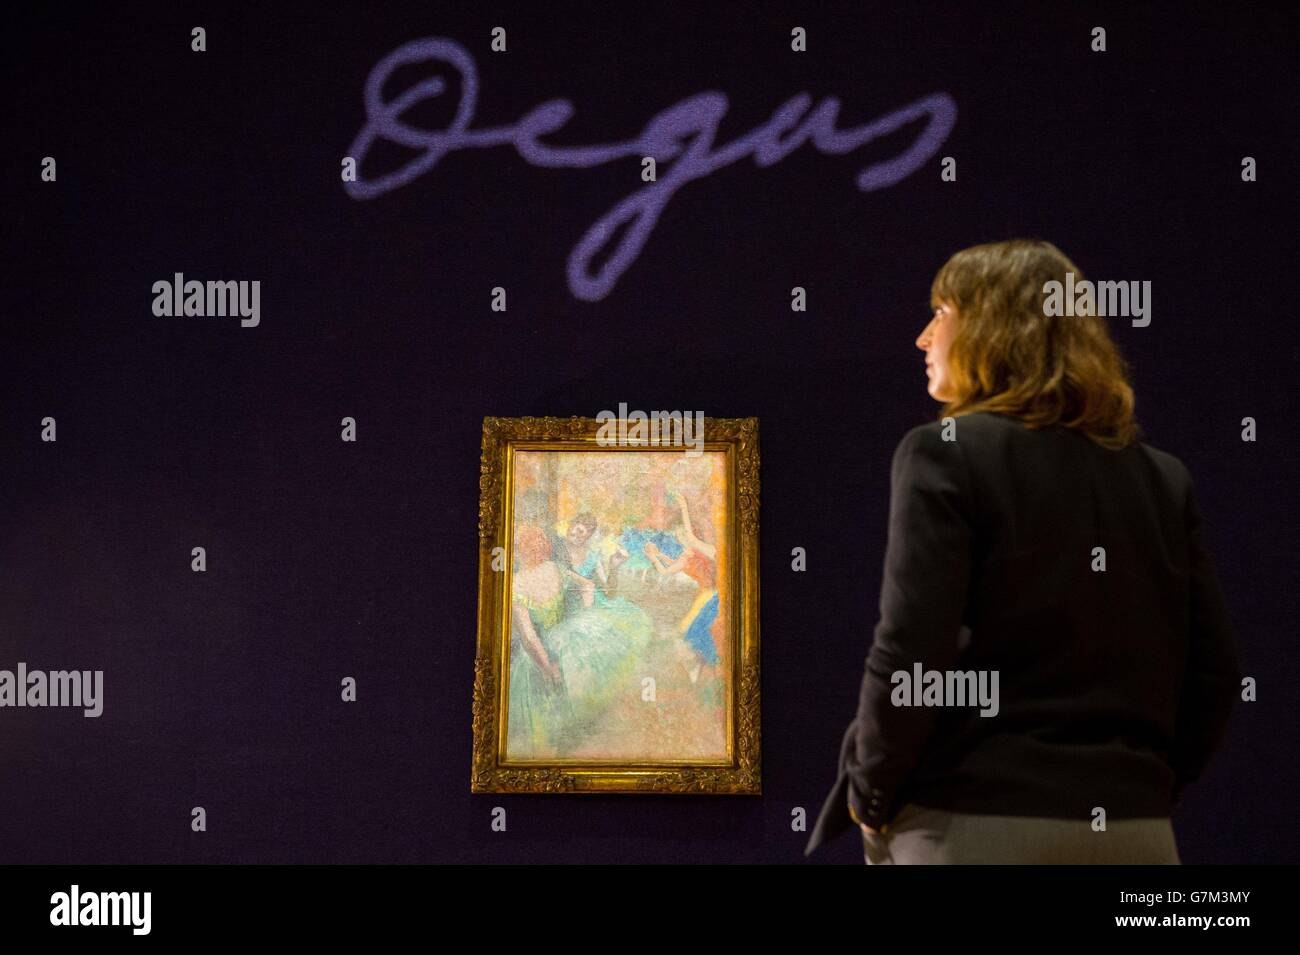 A visitor views 'Scene de ballet' by Edgar Degas, at Bonhams in London, which is expected to fetch &Acirc;&pound;2.5 million to &Acirc;&pound;3.5 million as part of Bonhams' Impressionist &amp; Modern Art auction on February 3rd. Stock Photo